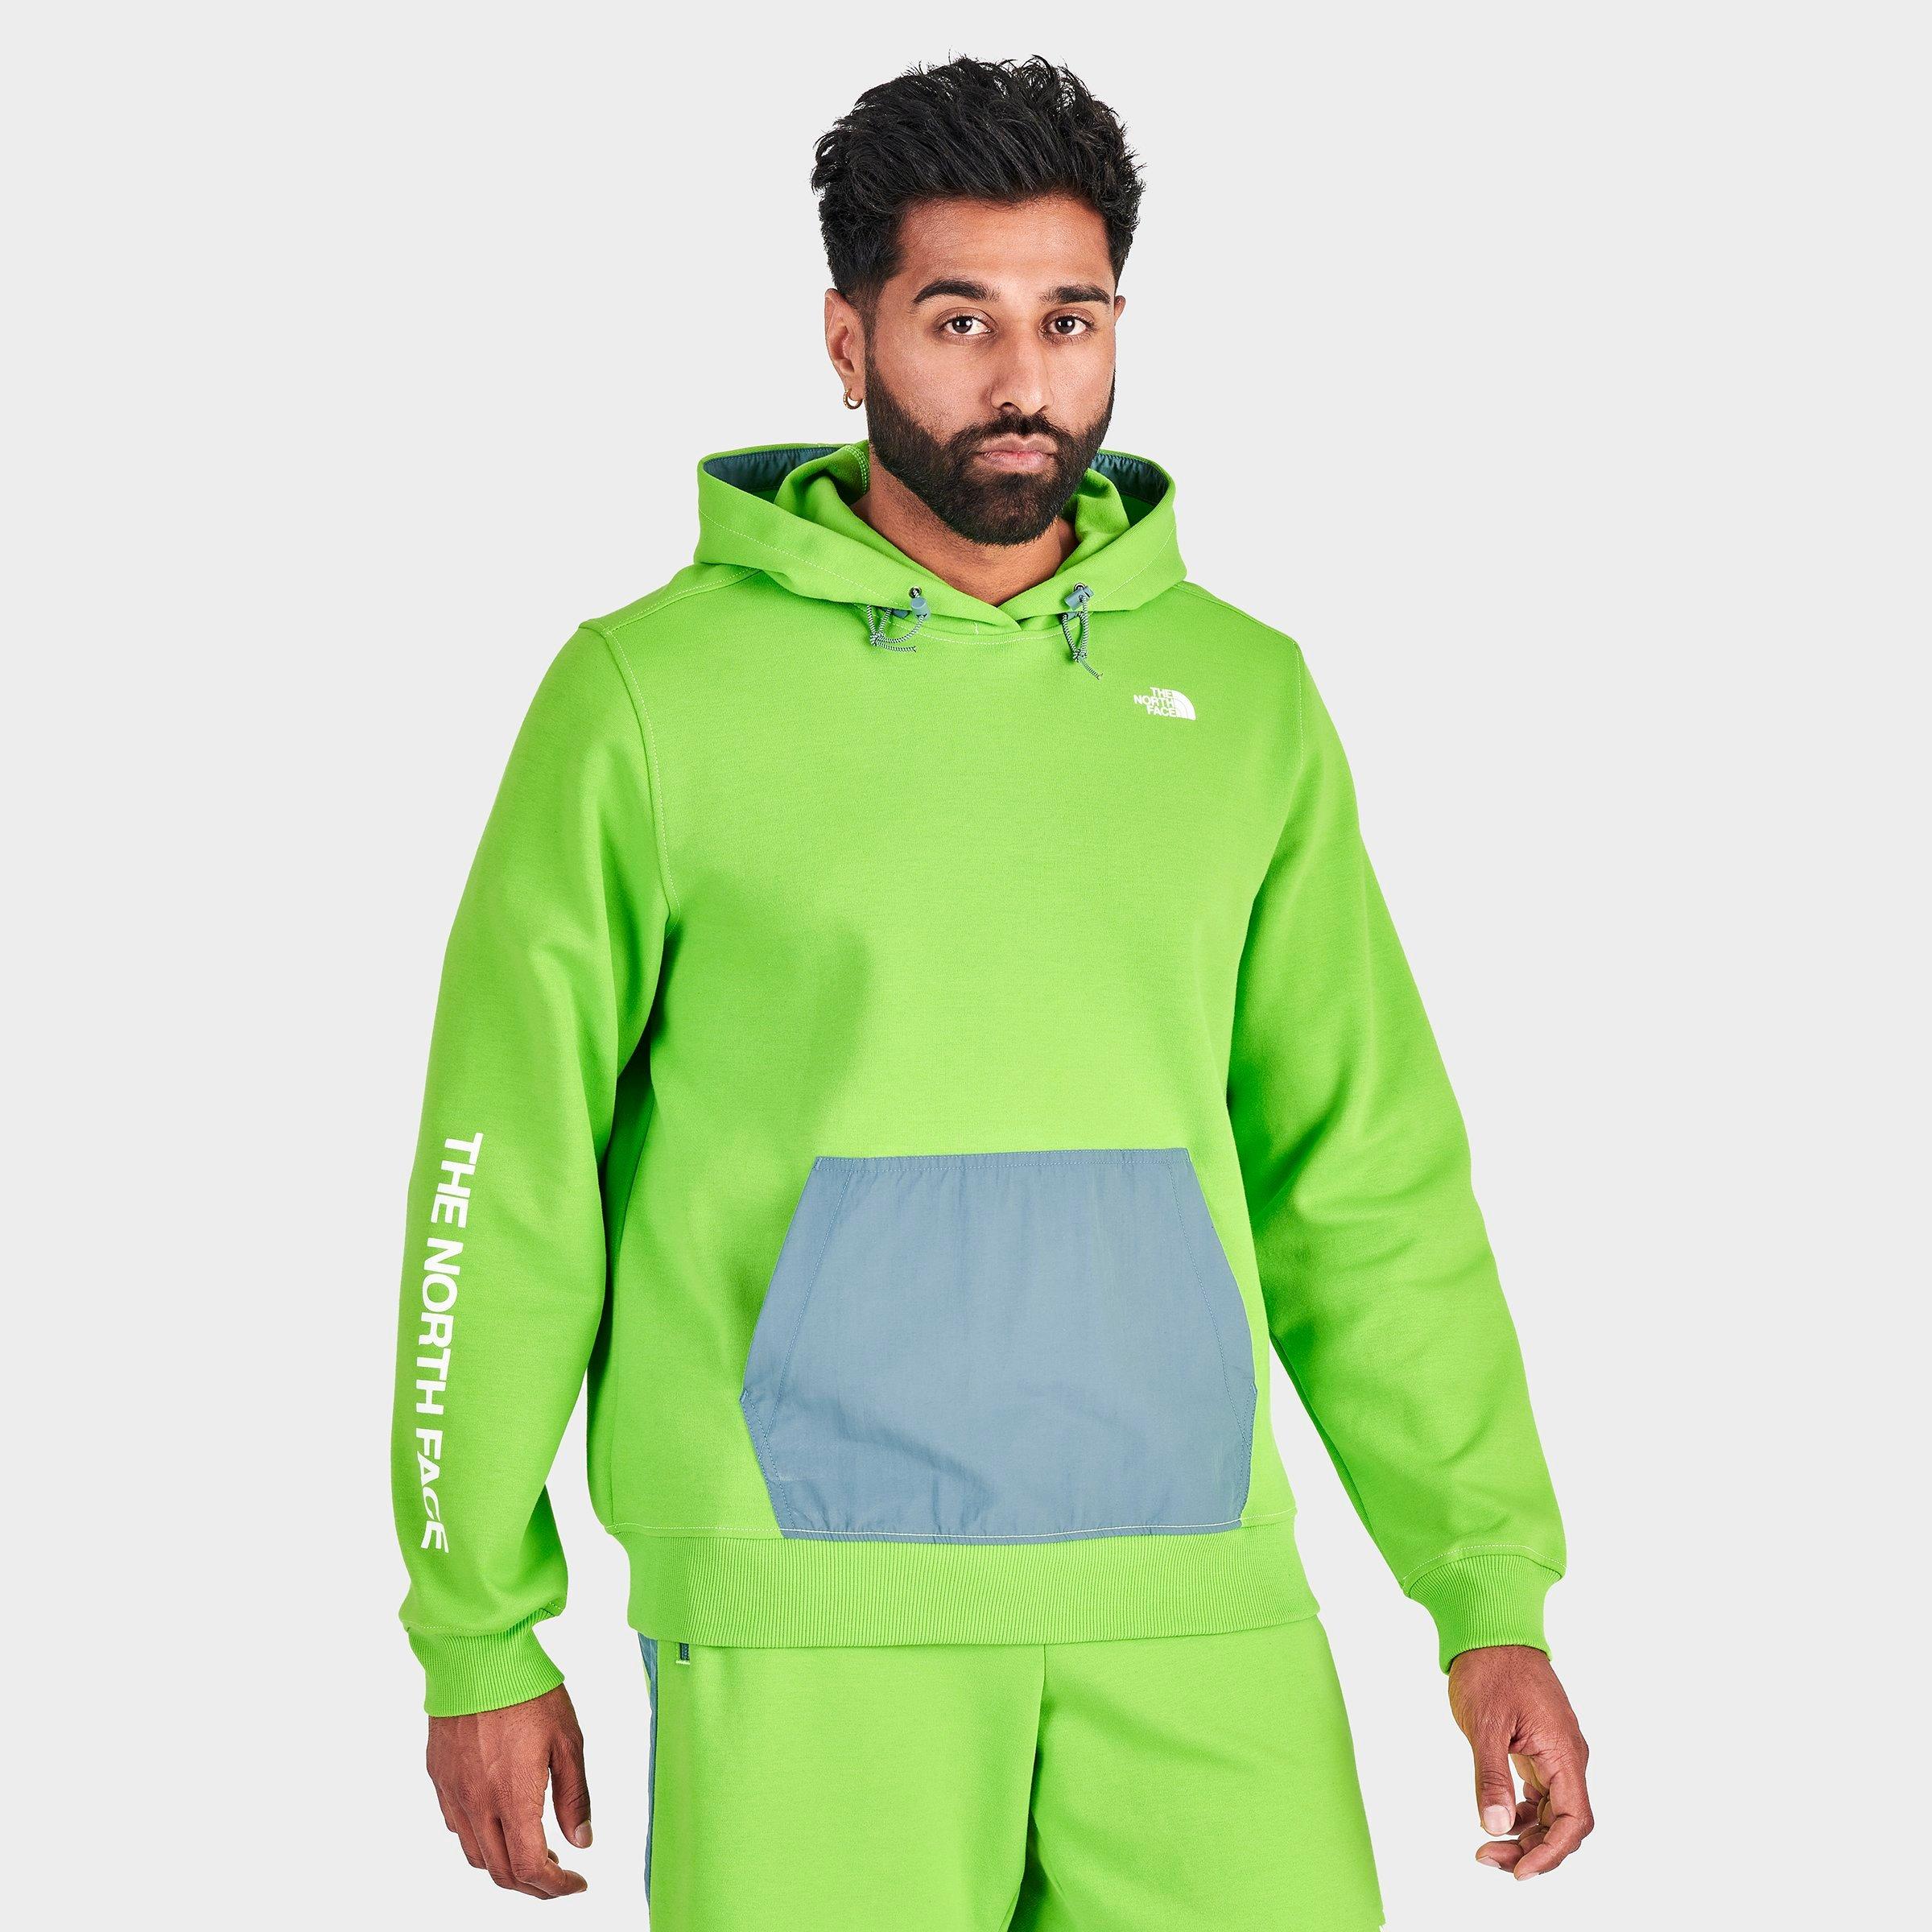 Shop The North Face Inc Merchandise on AccuWeather Shop